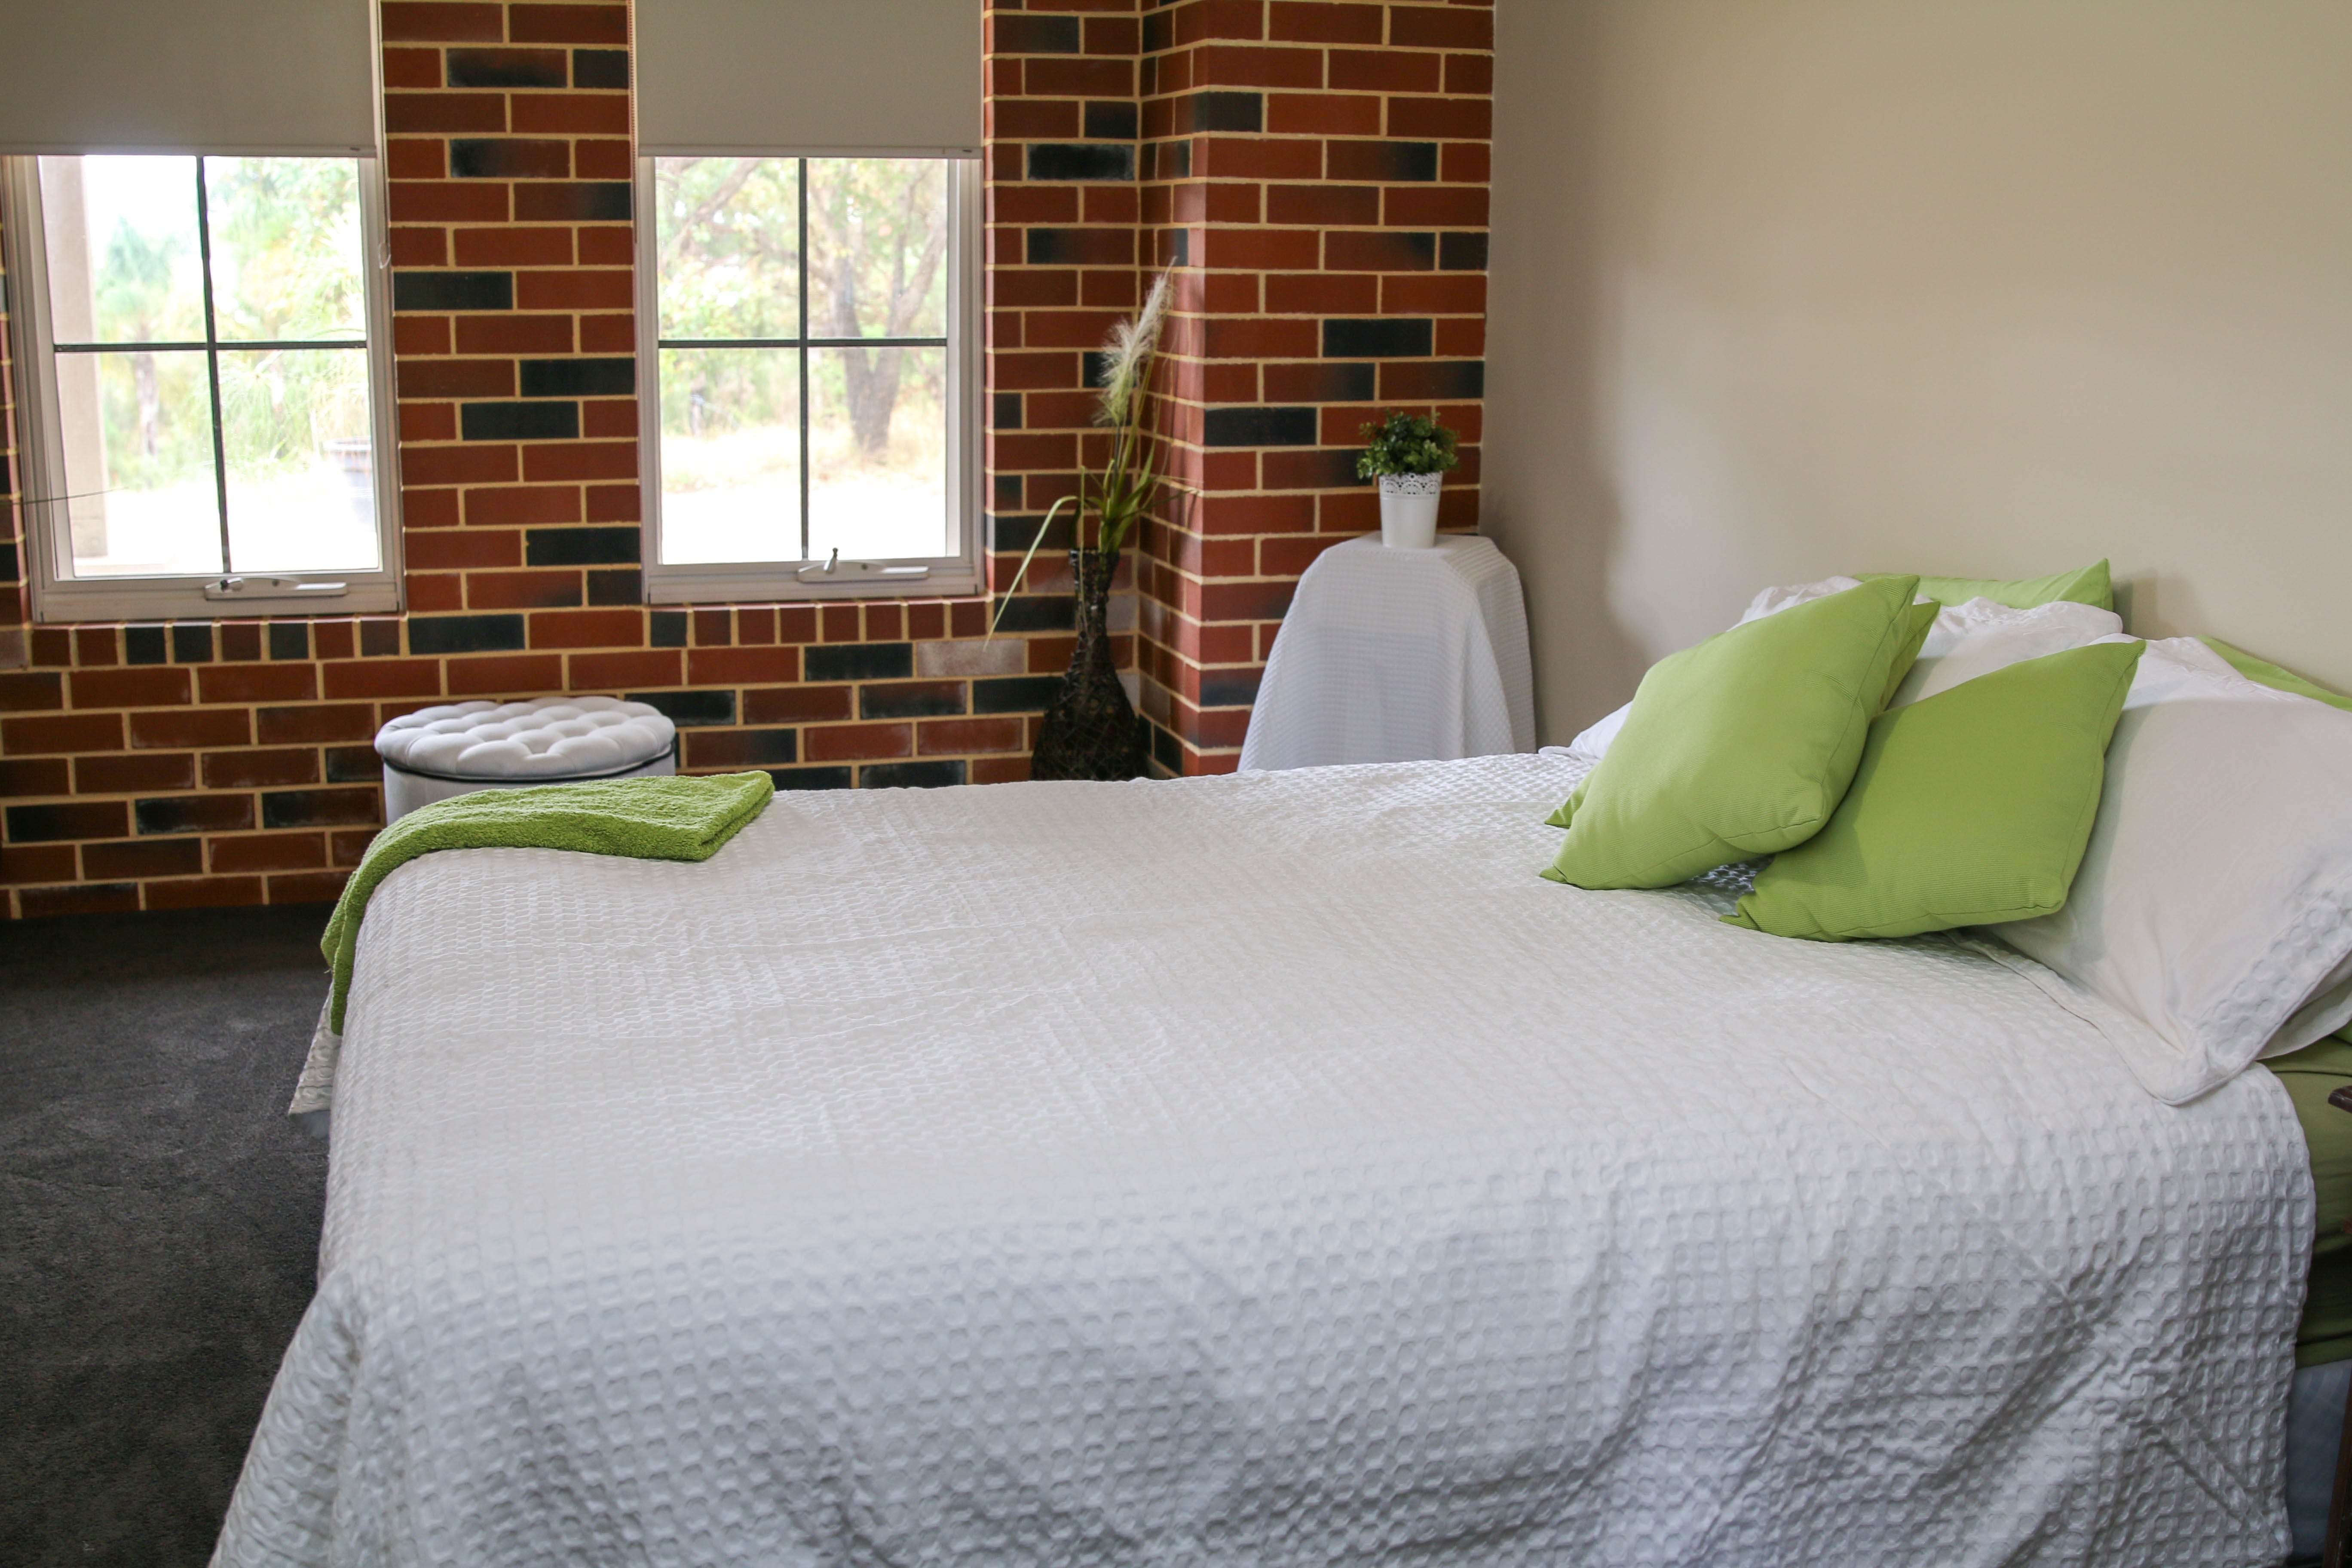 Downunder Farmstays - Accommodation in Surfers Paradise